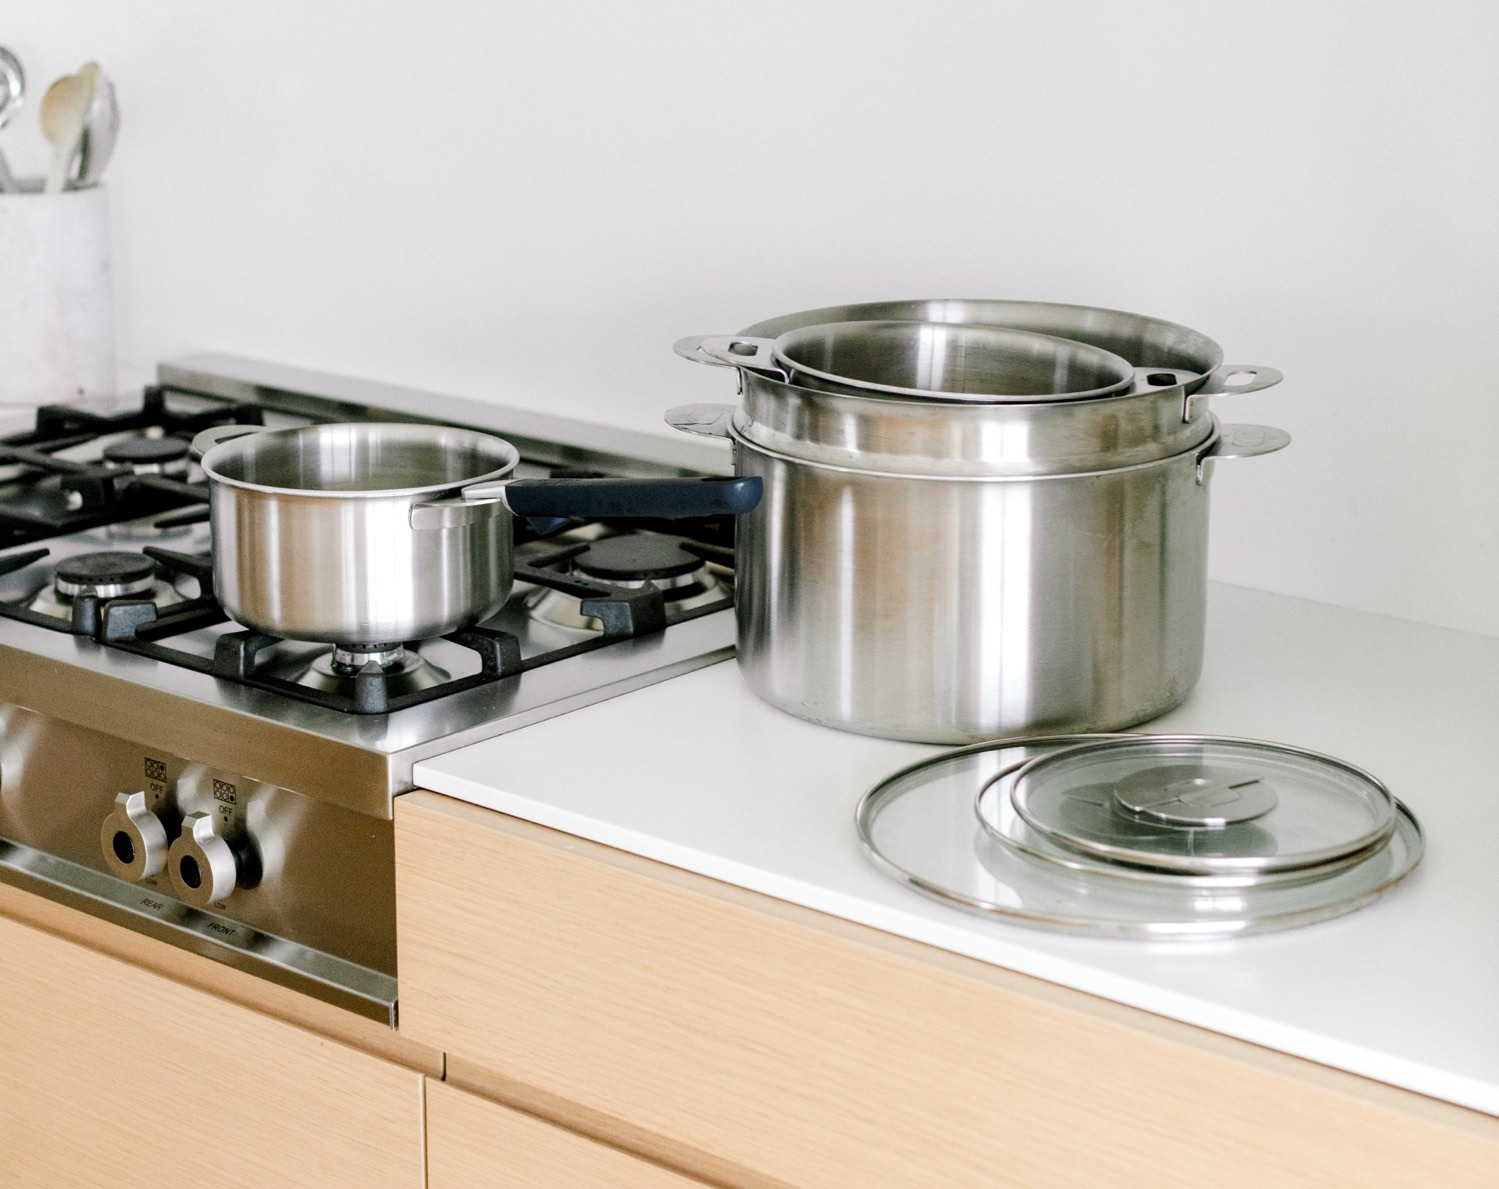 ENSEMBL Stackware stainless steel cookware on the stove